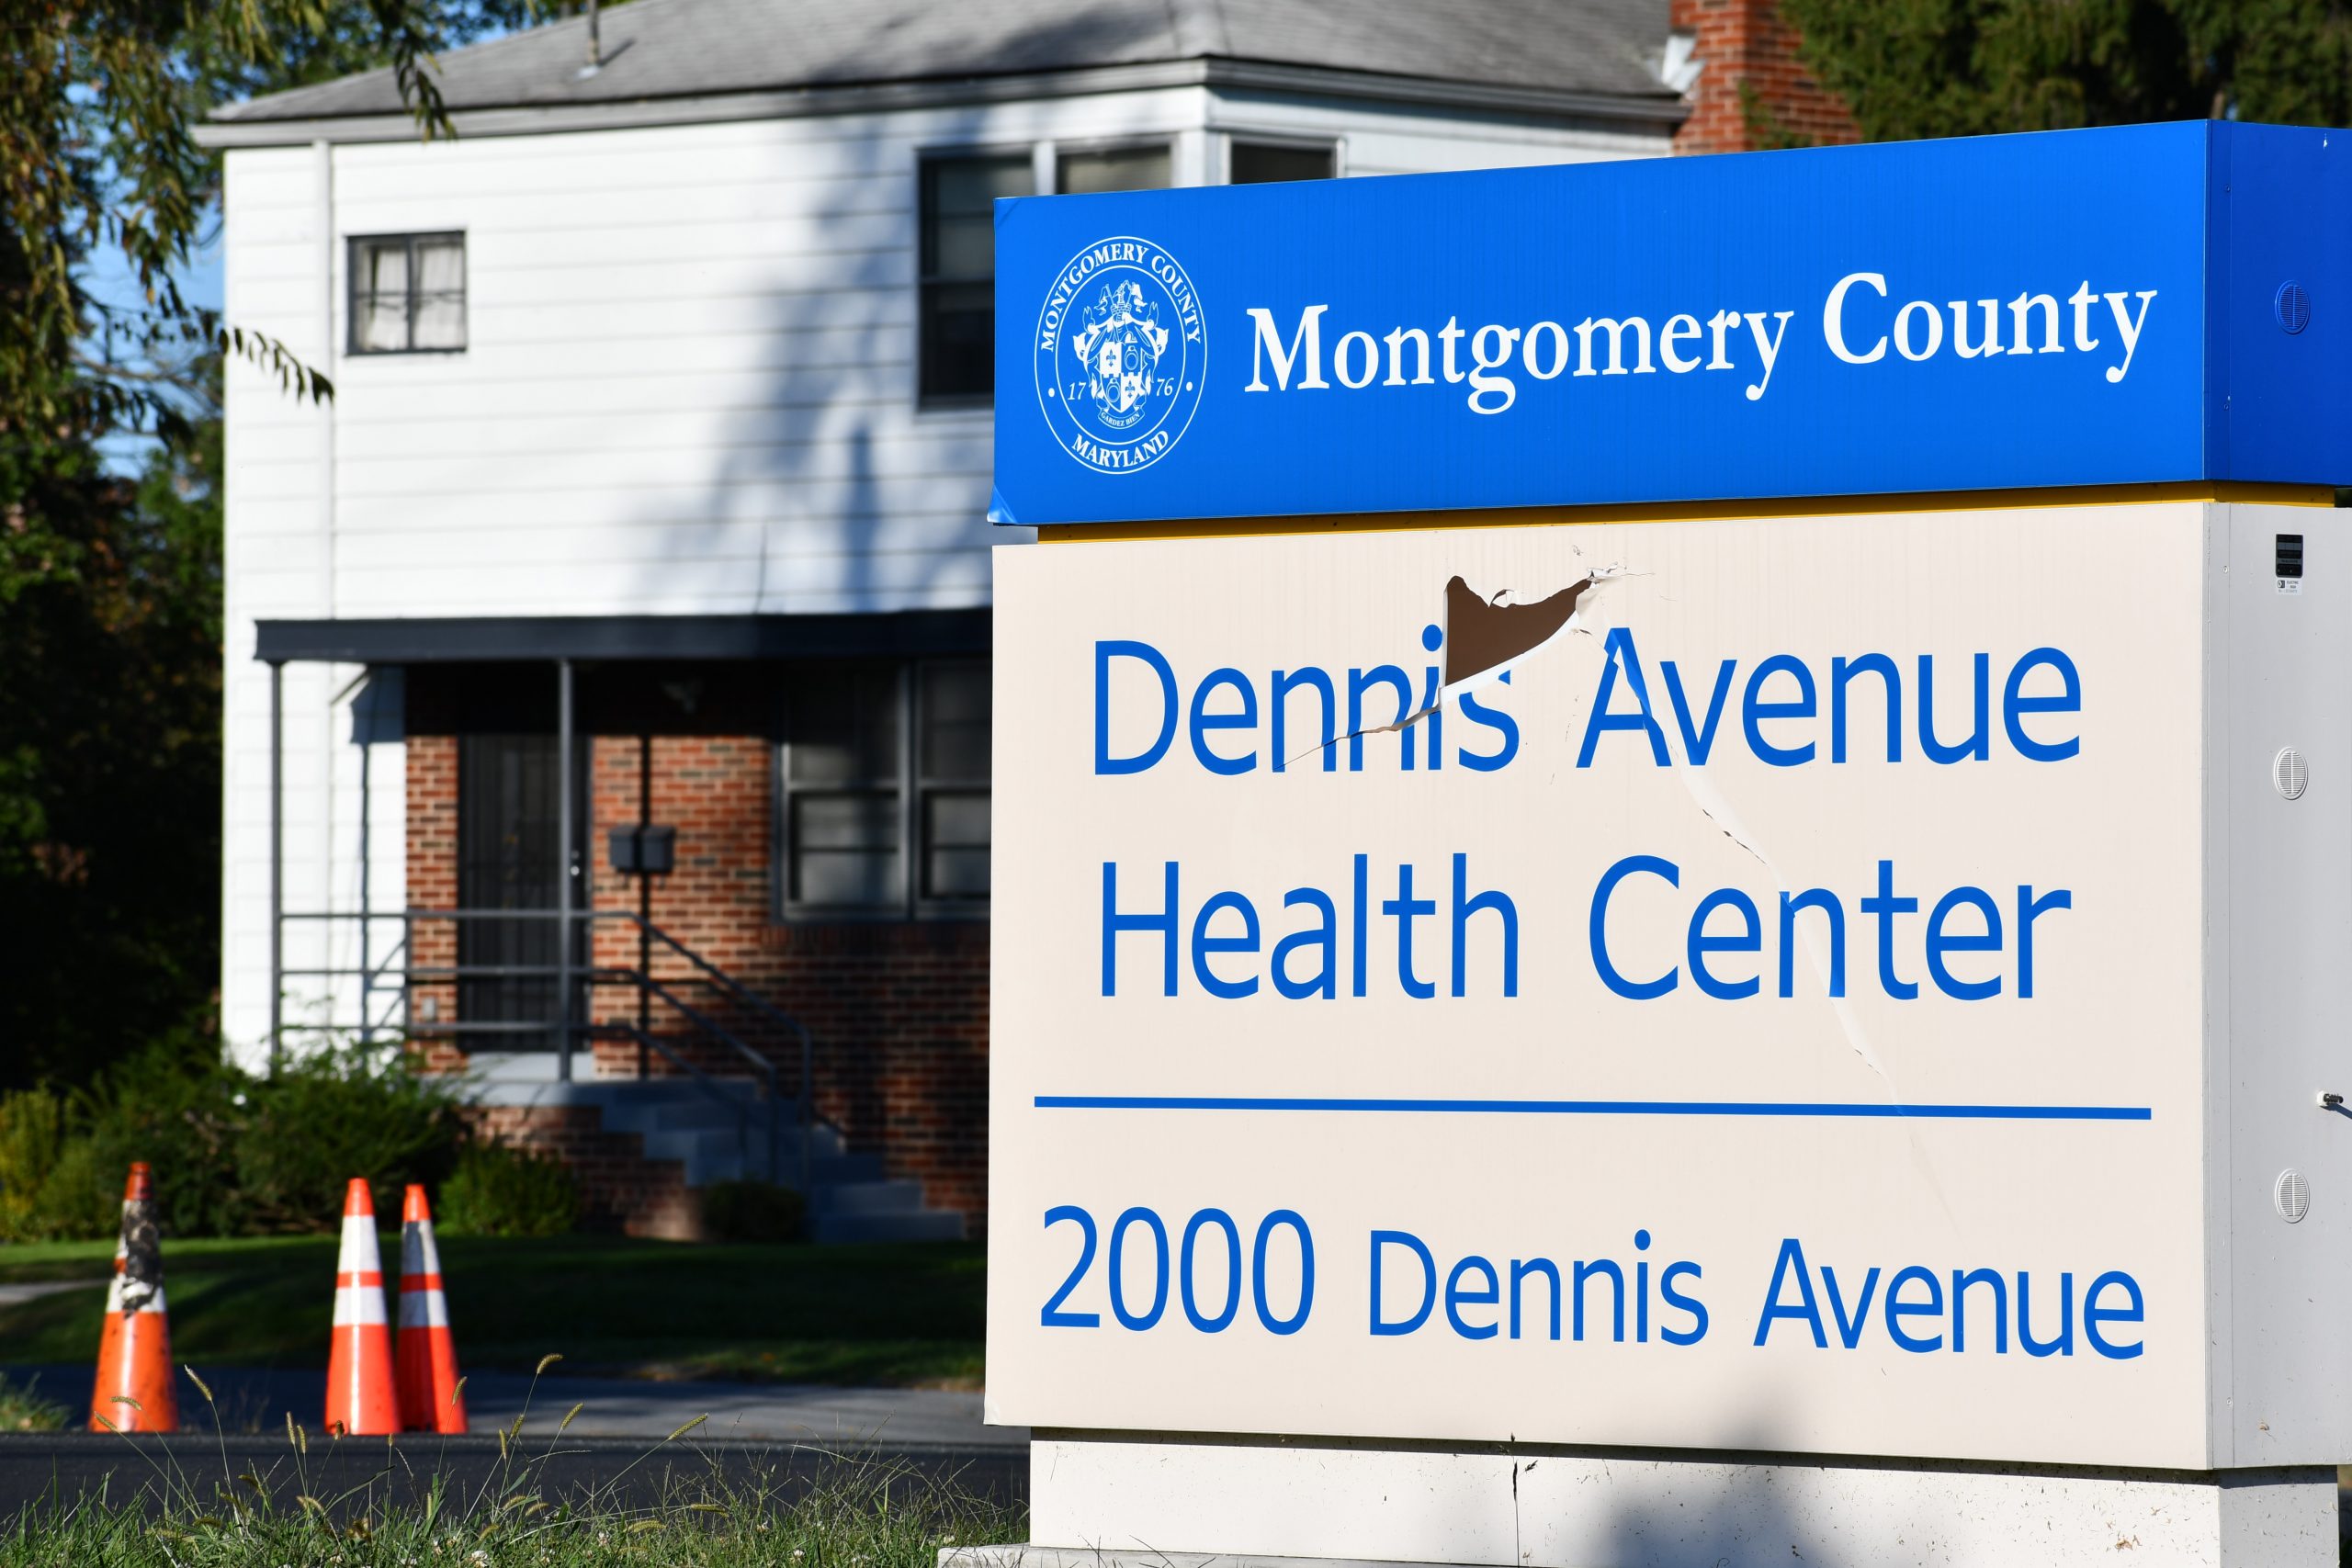 Signage for Montgomery County's Dennis Avenue Health Center